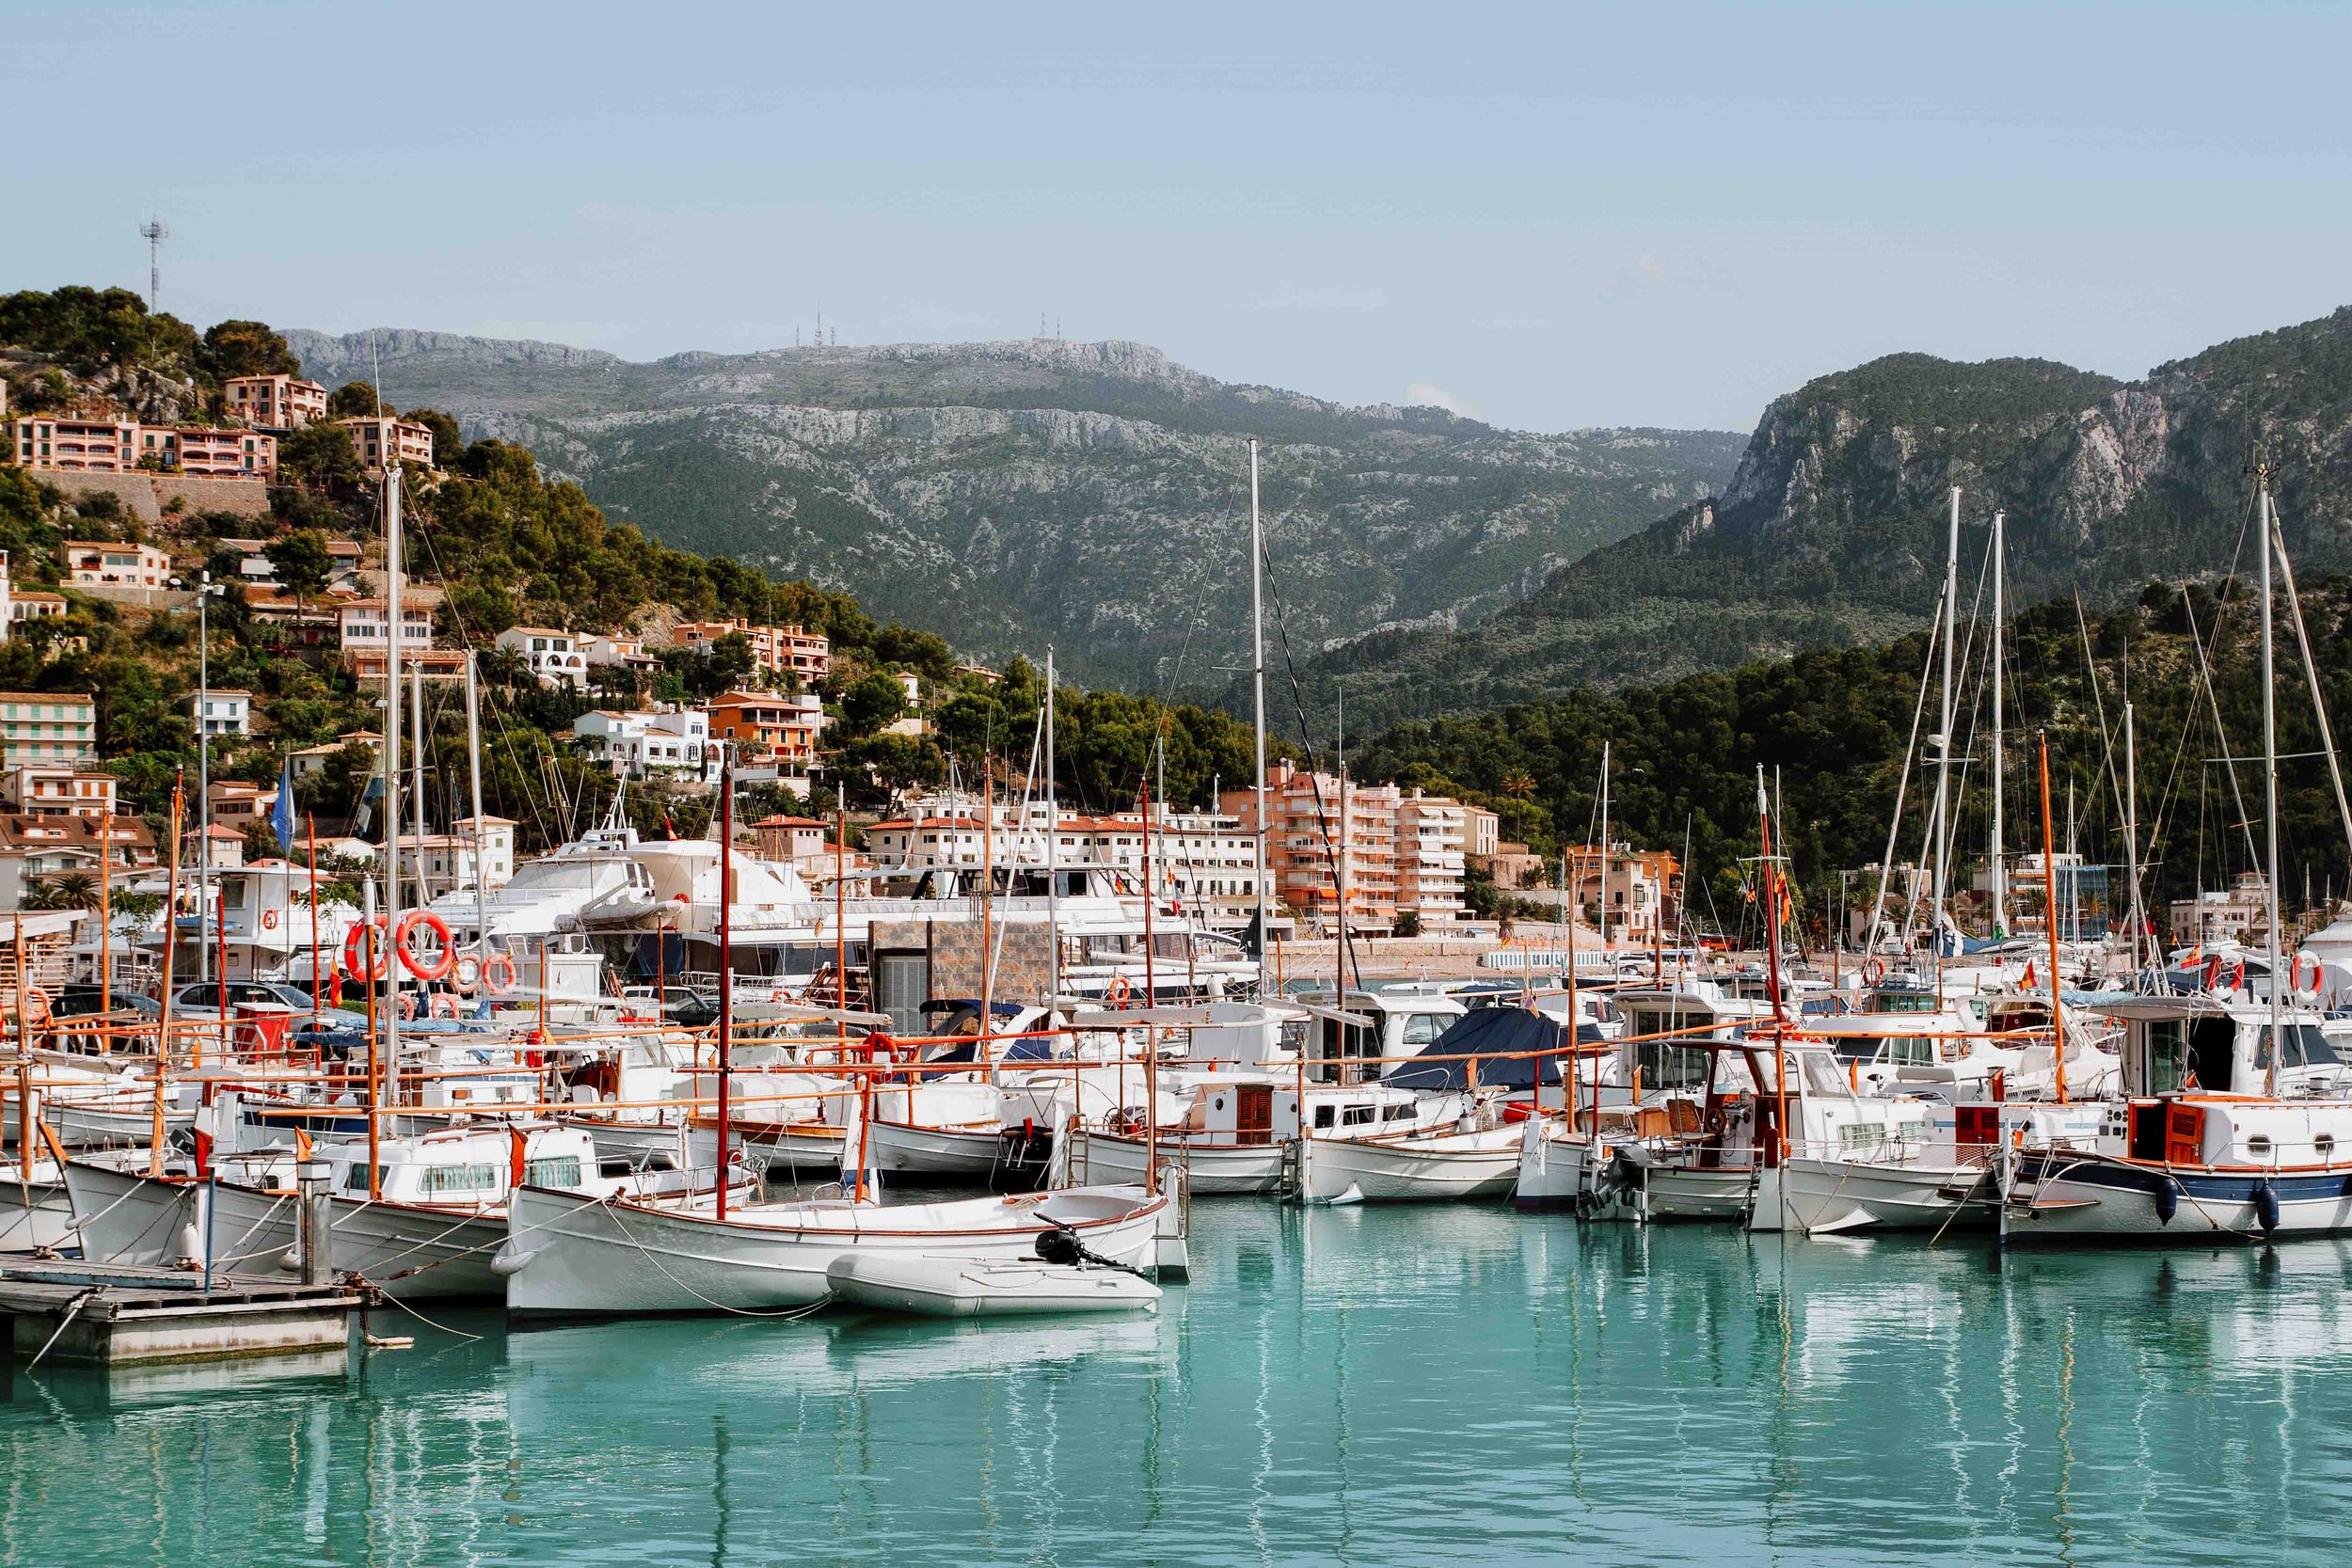 Port de Soller in Mallorca hottest place in europe in May